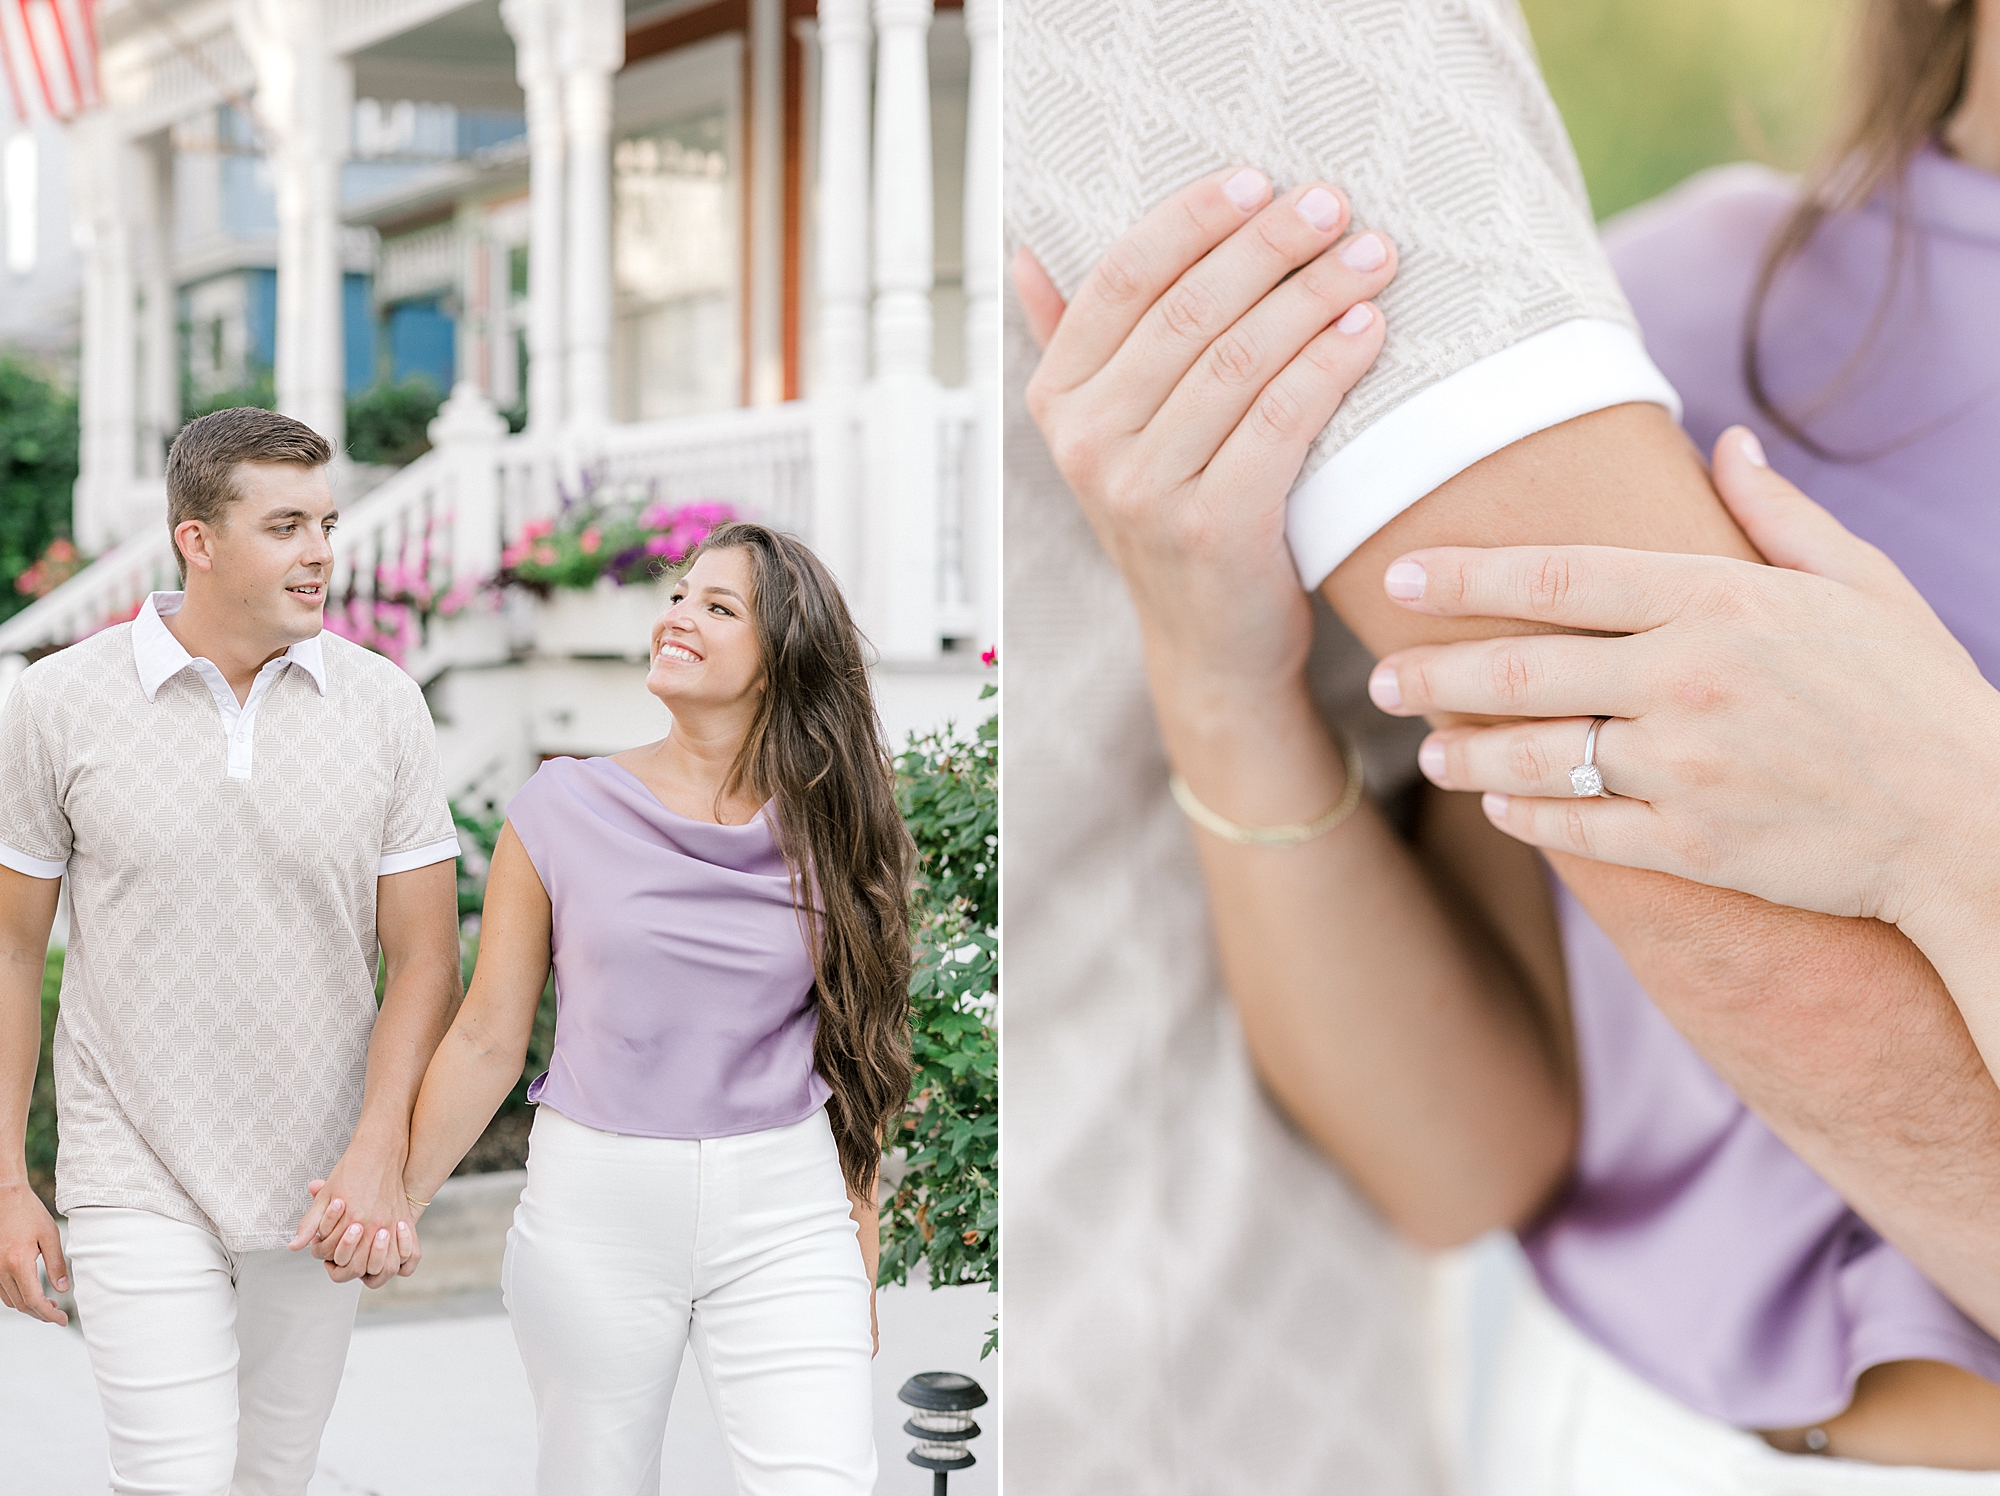 woman holds hands with man holding his arm showing off engagement ring